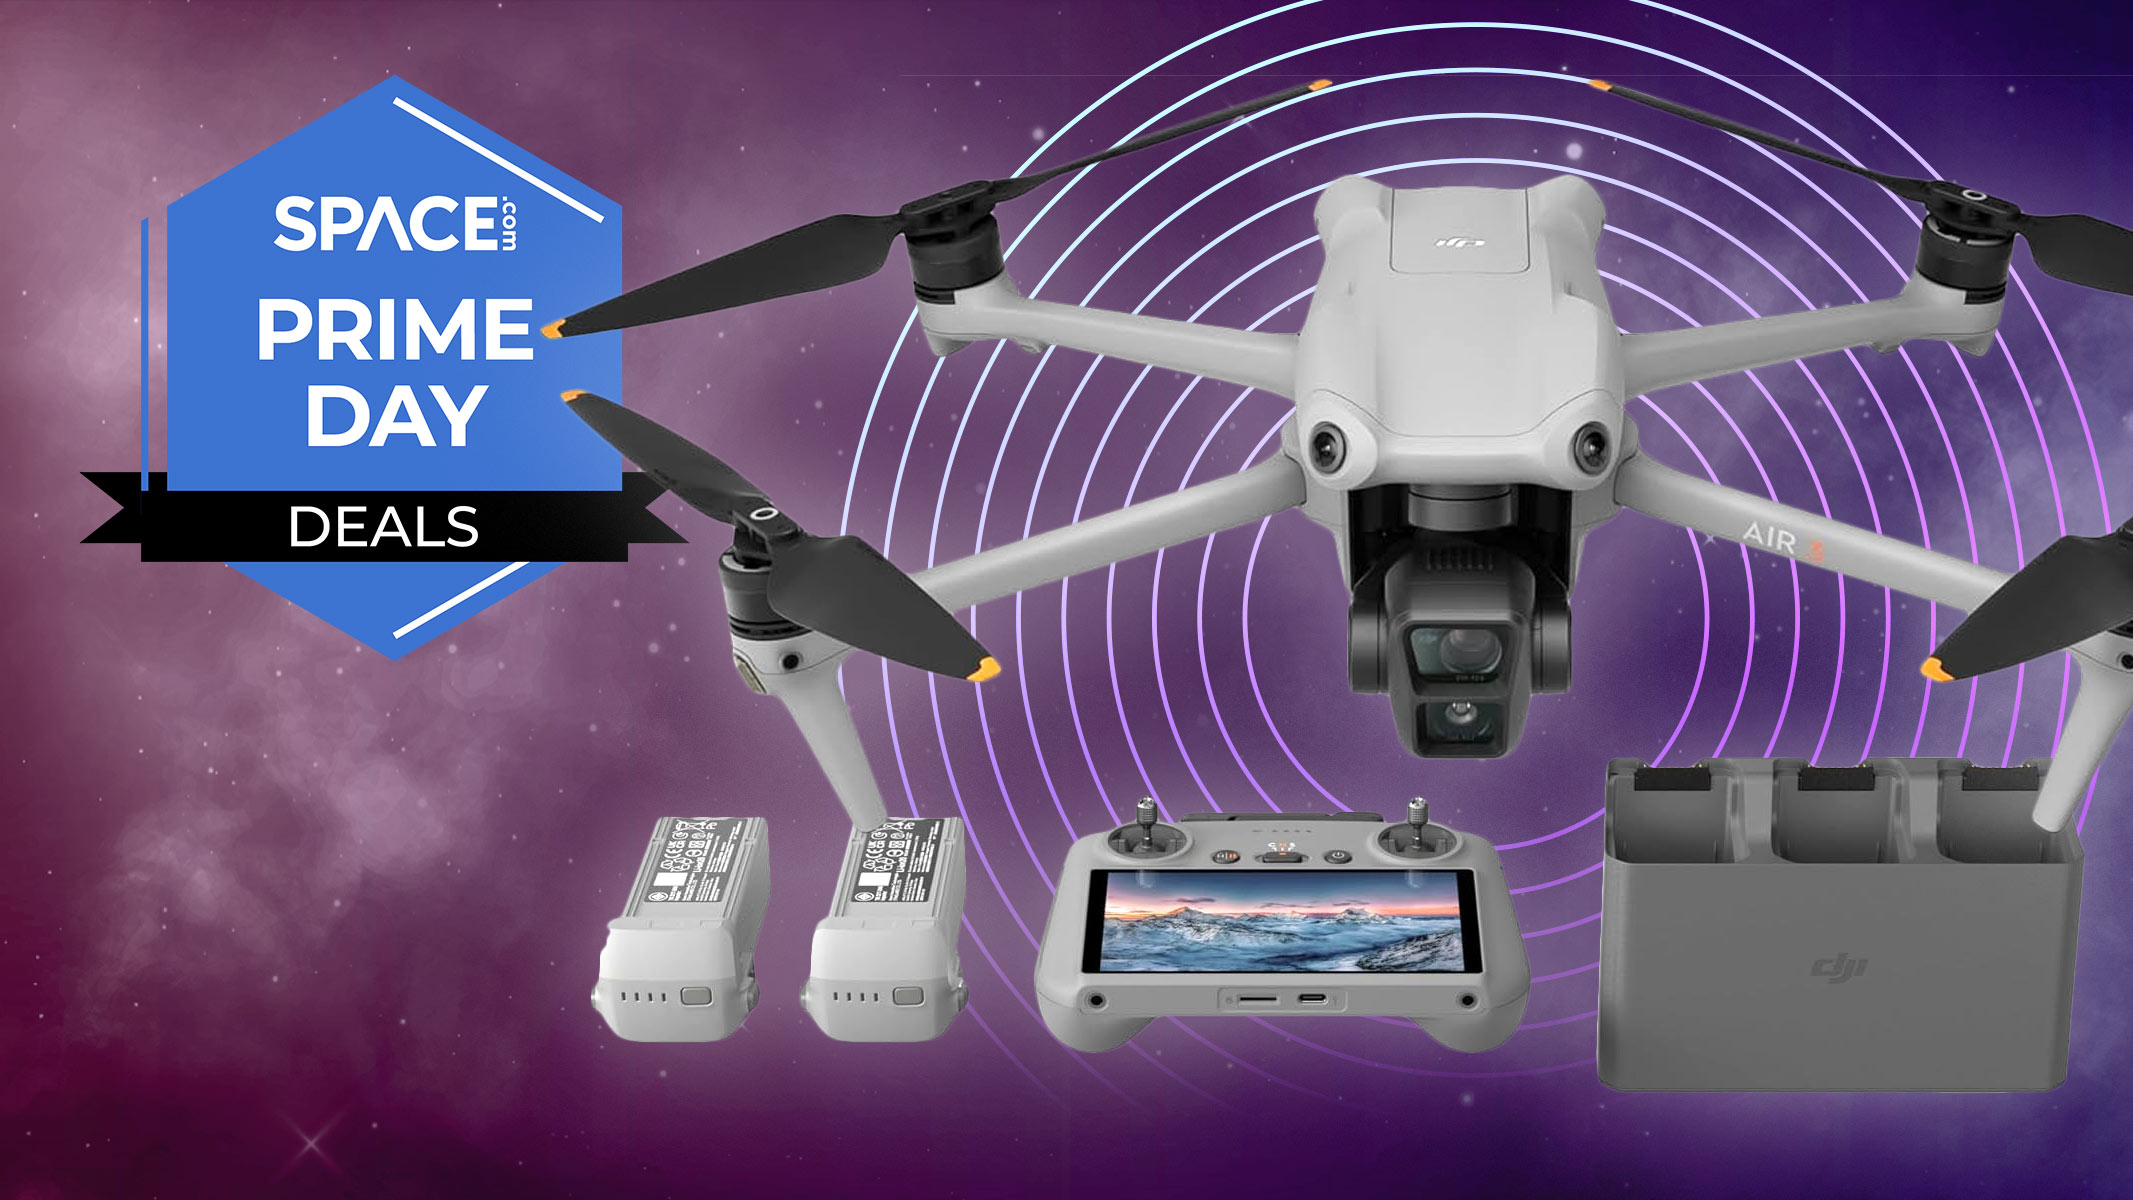  Save over $300 in this Amazon Prime Day DJI drone deal 